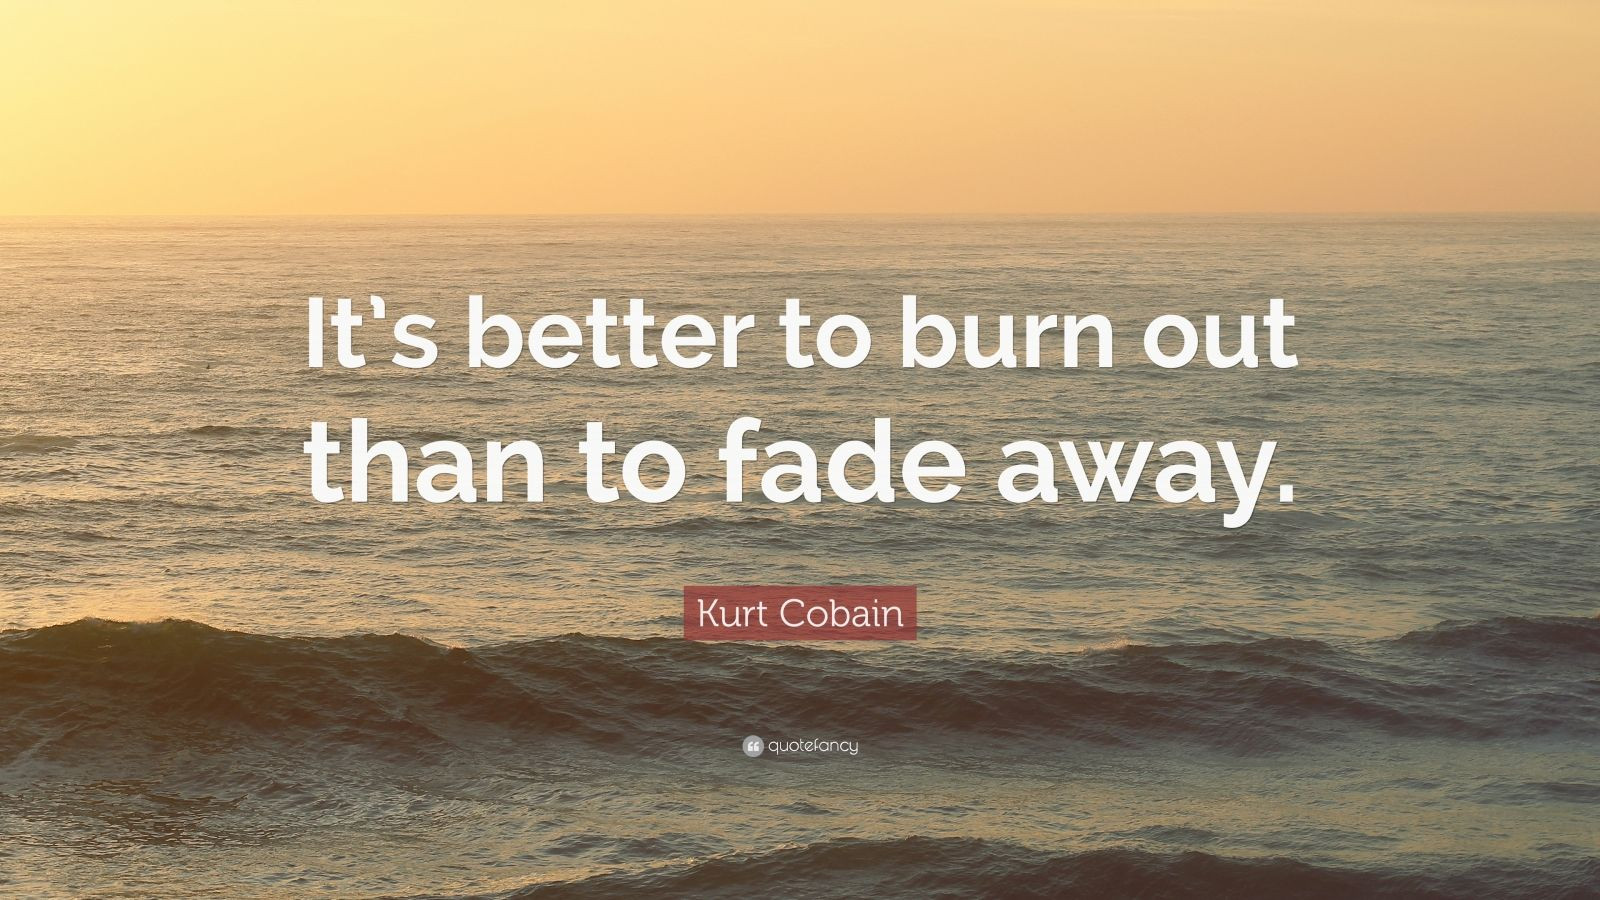 It's Better To Burn Out Than To Fade Away
 Kurt Cobain Quote “It’s better to burn out than to fade